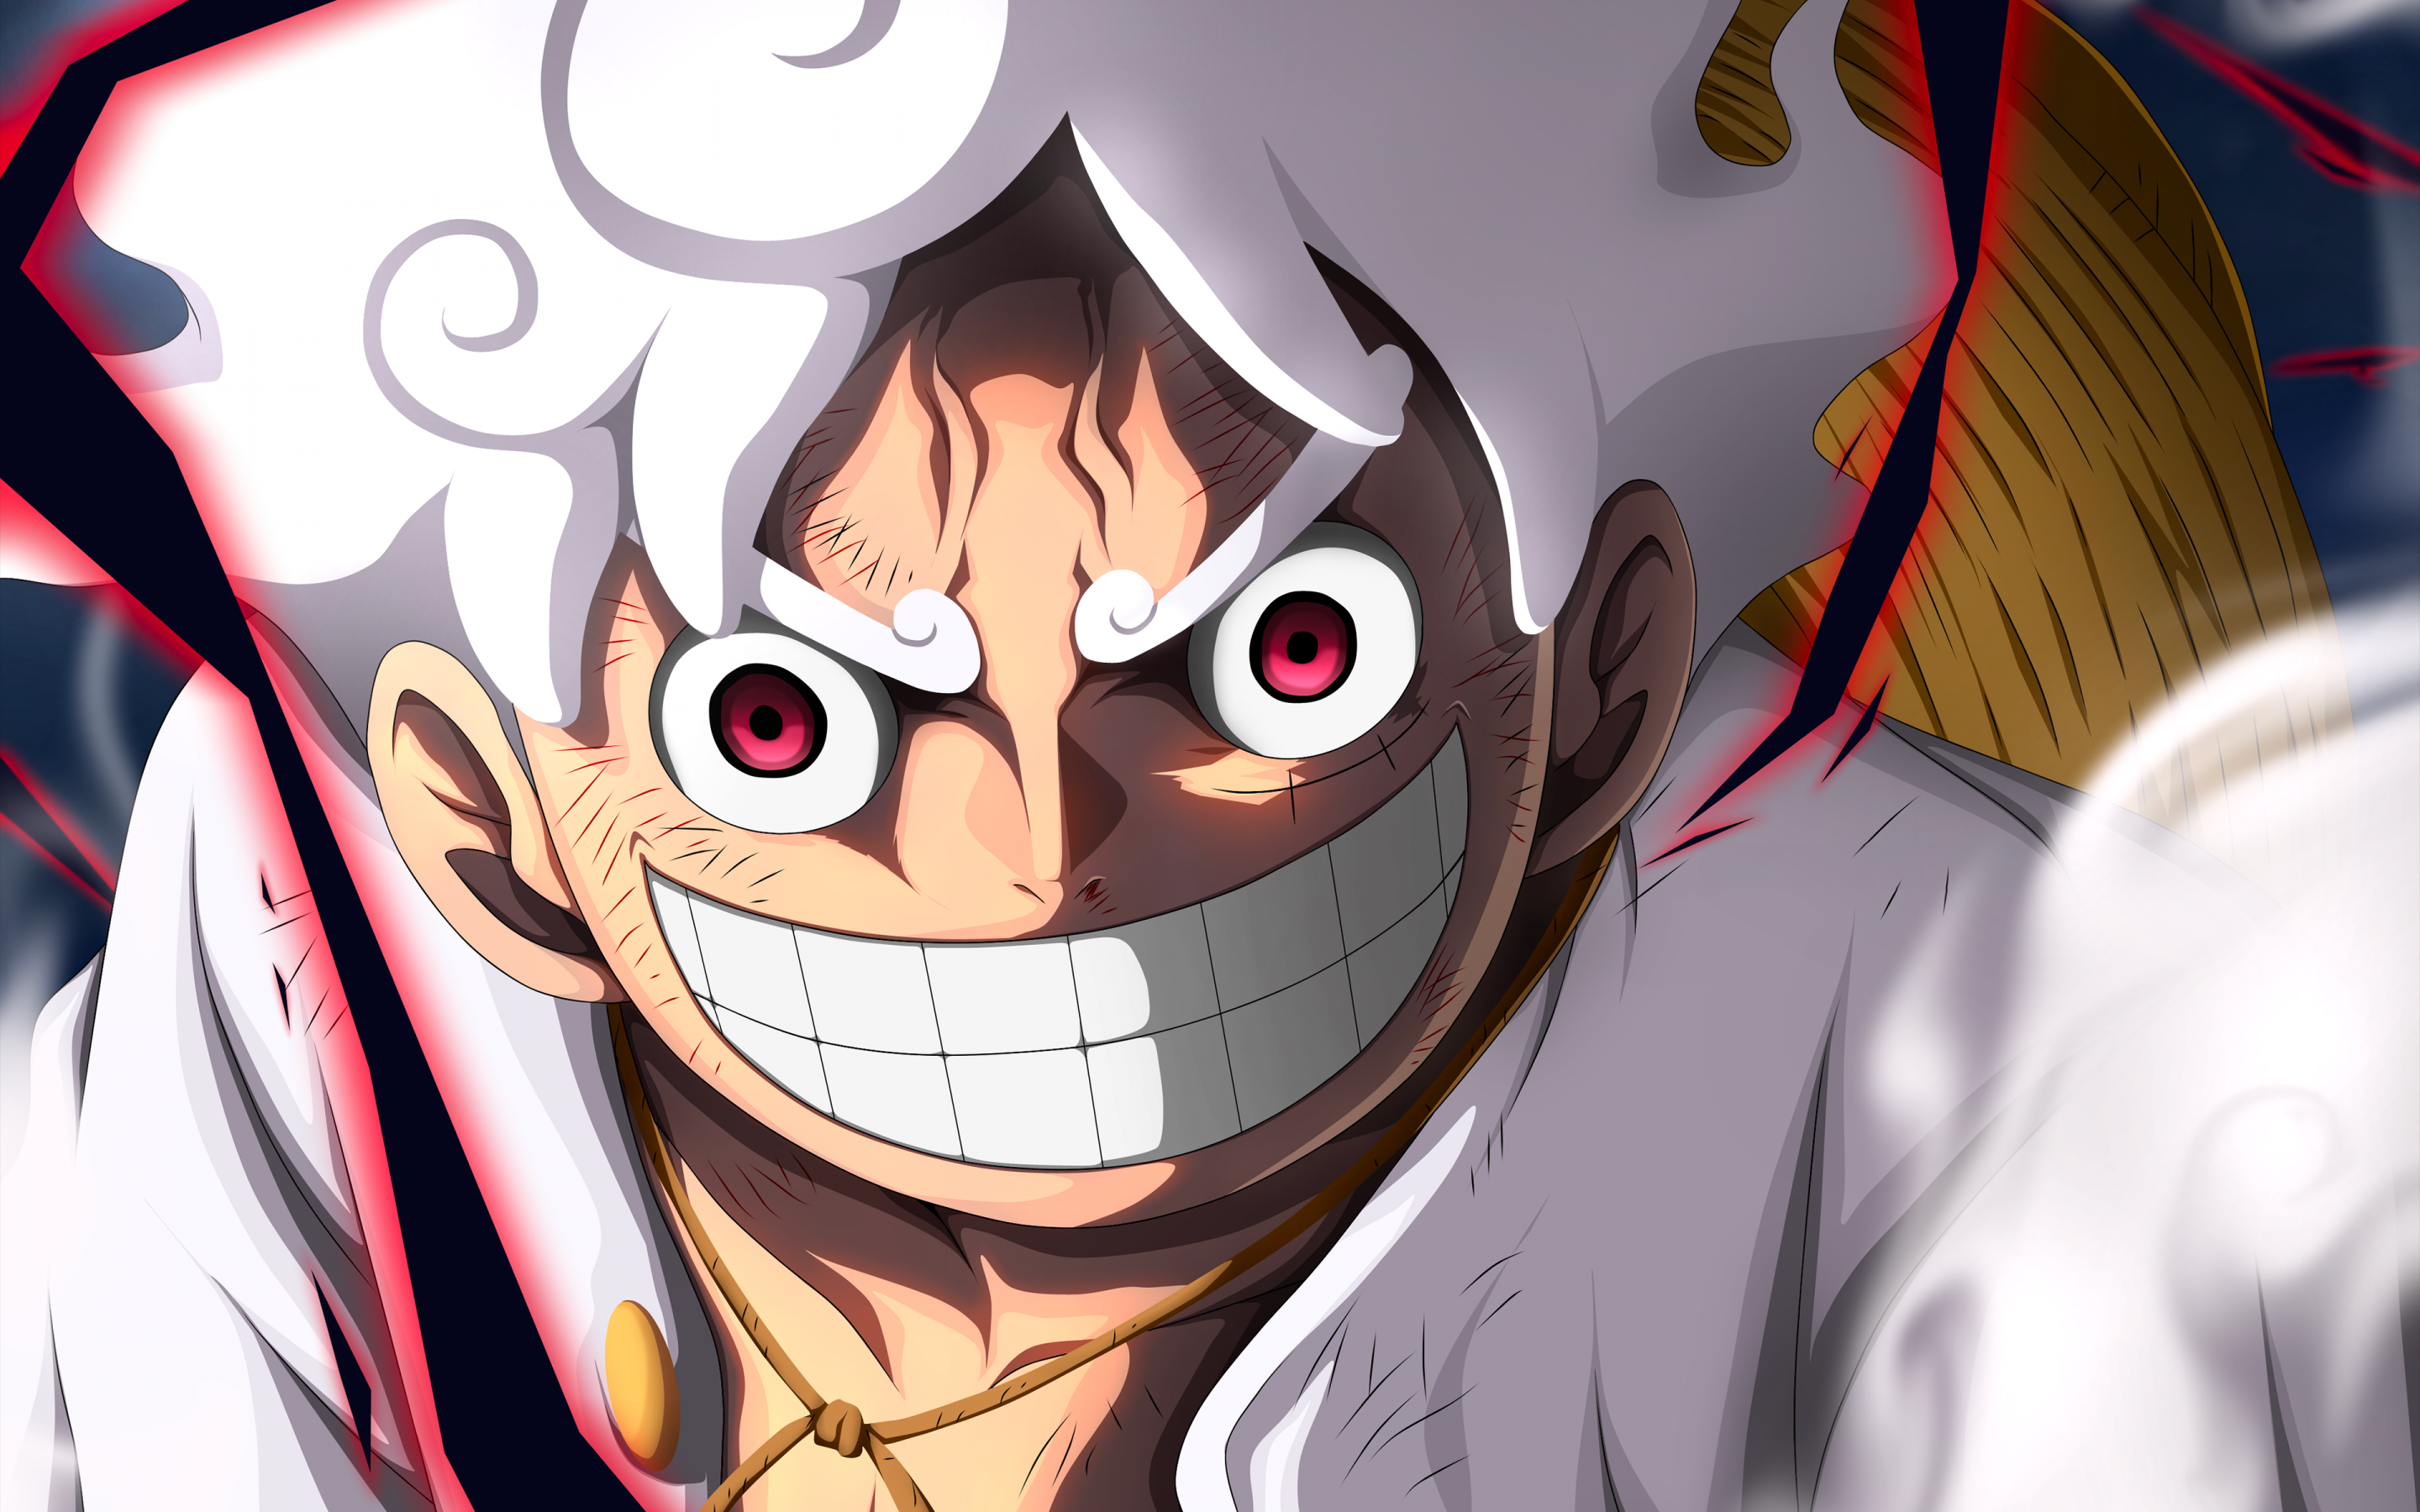 Wallpaper ID: 422867 / Anime One Piece Phone Wallpaper, Monkey D. Luffy,  828x1792 free download